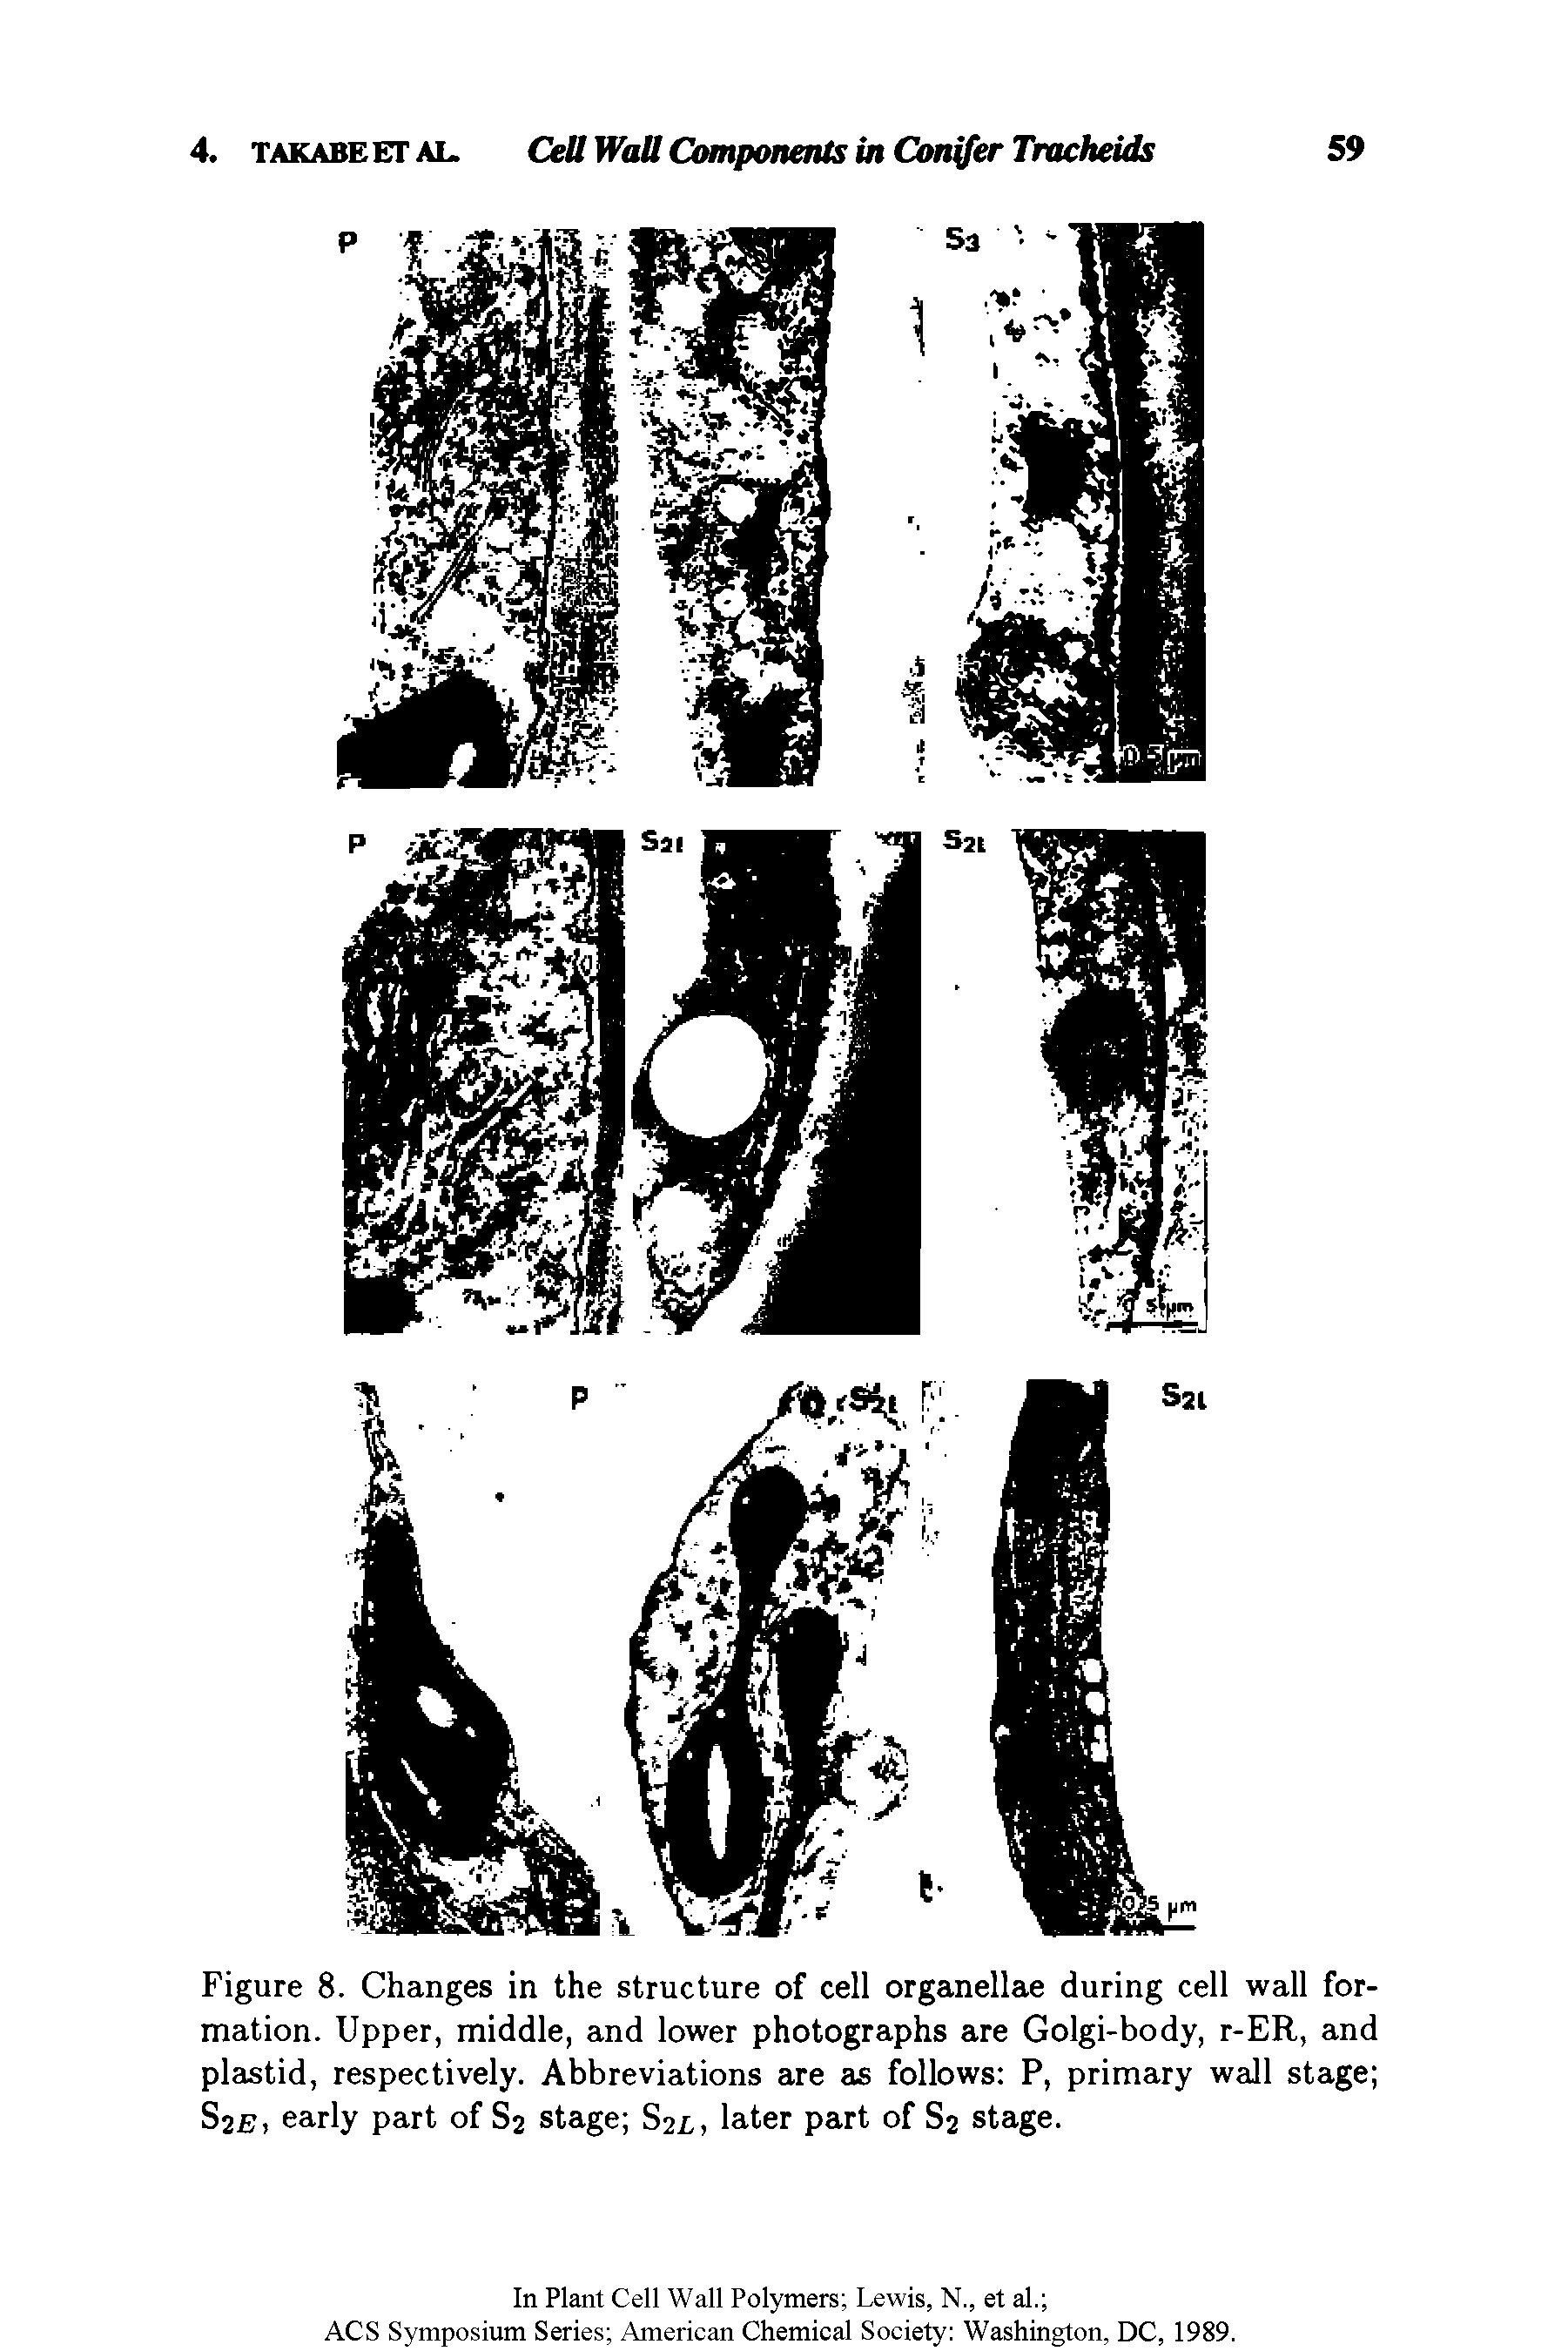 Figure 8. Changes in the structure of cell organellae during cell wall formation. Upper, middle, and lower photographs are Golgi-body, r-ER, and plastid, respectively. Abbreviations are as follows P, primary wall stage S2B, early part of S2 stage S2L, later part of S2 stage.